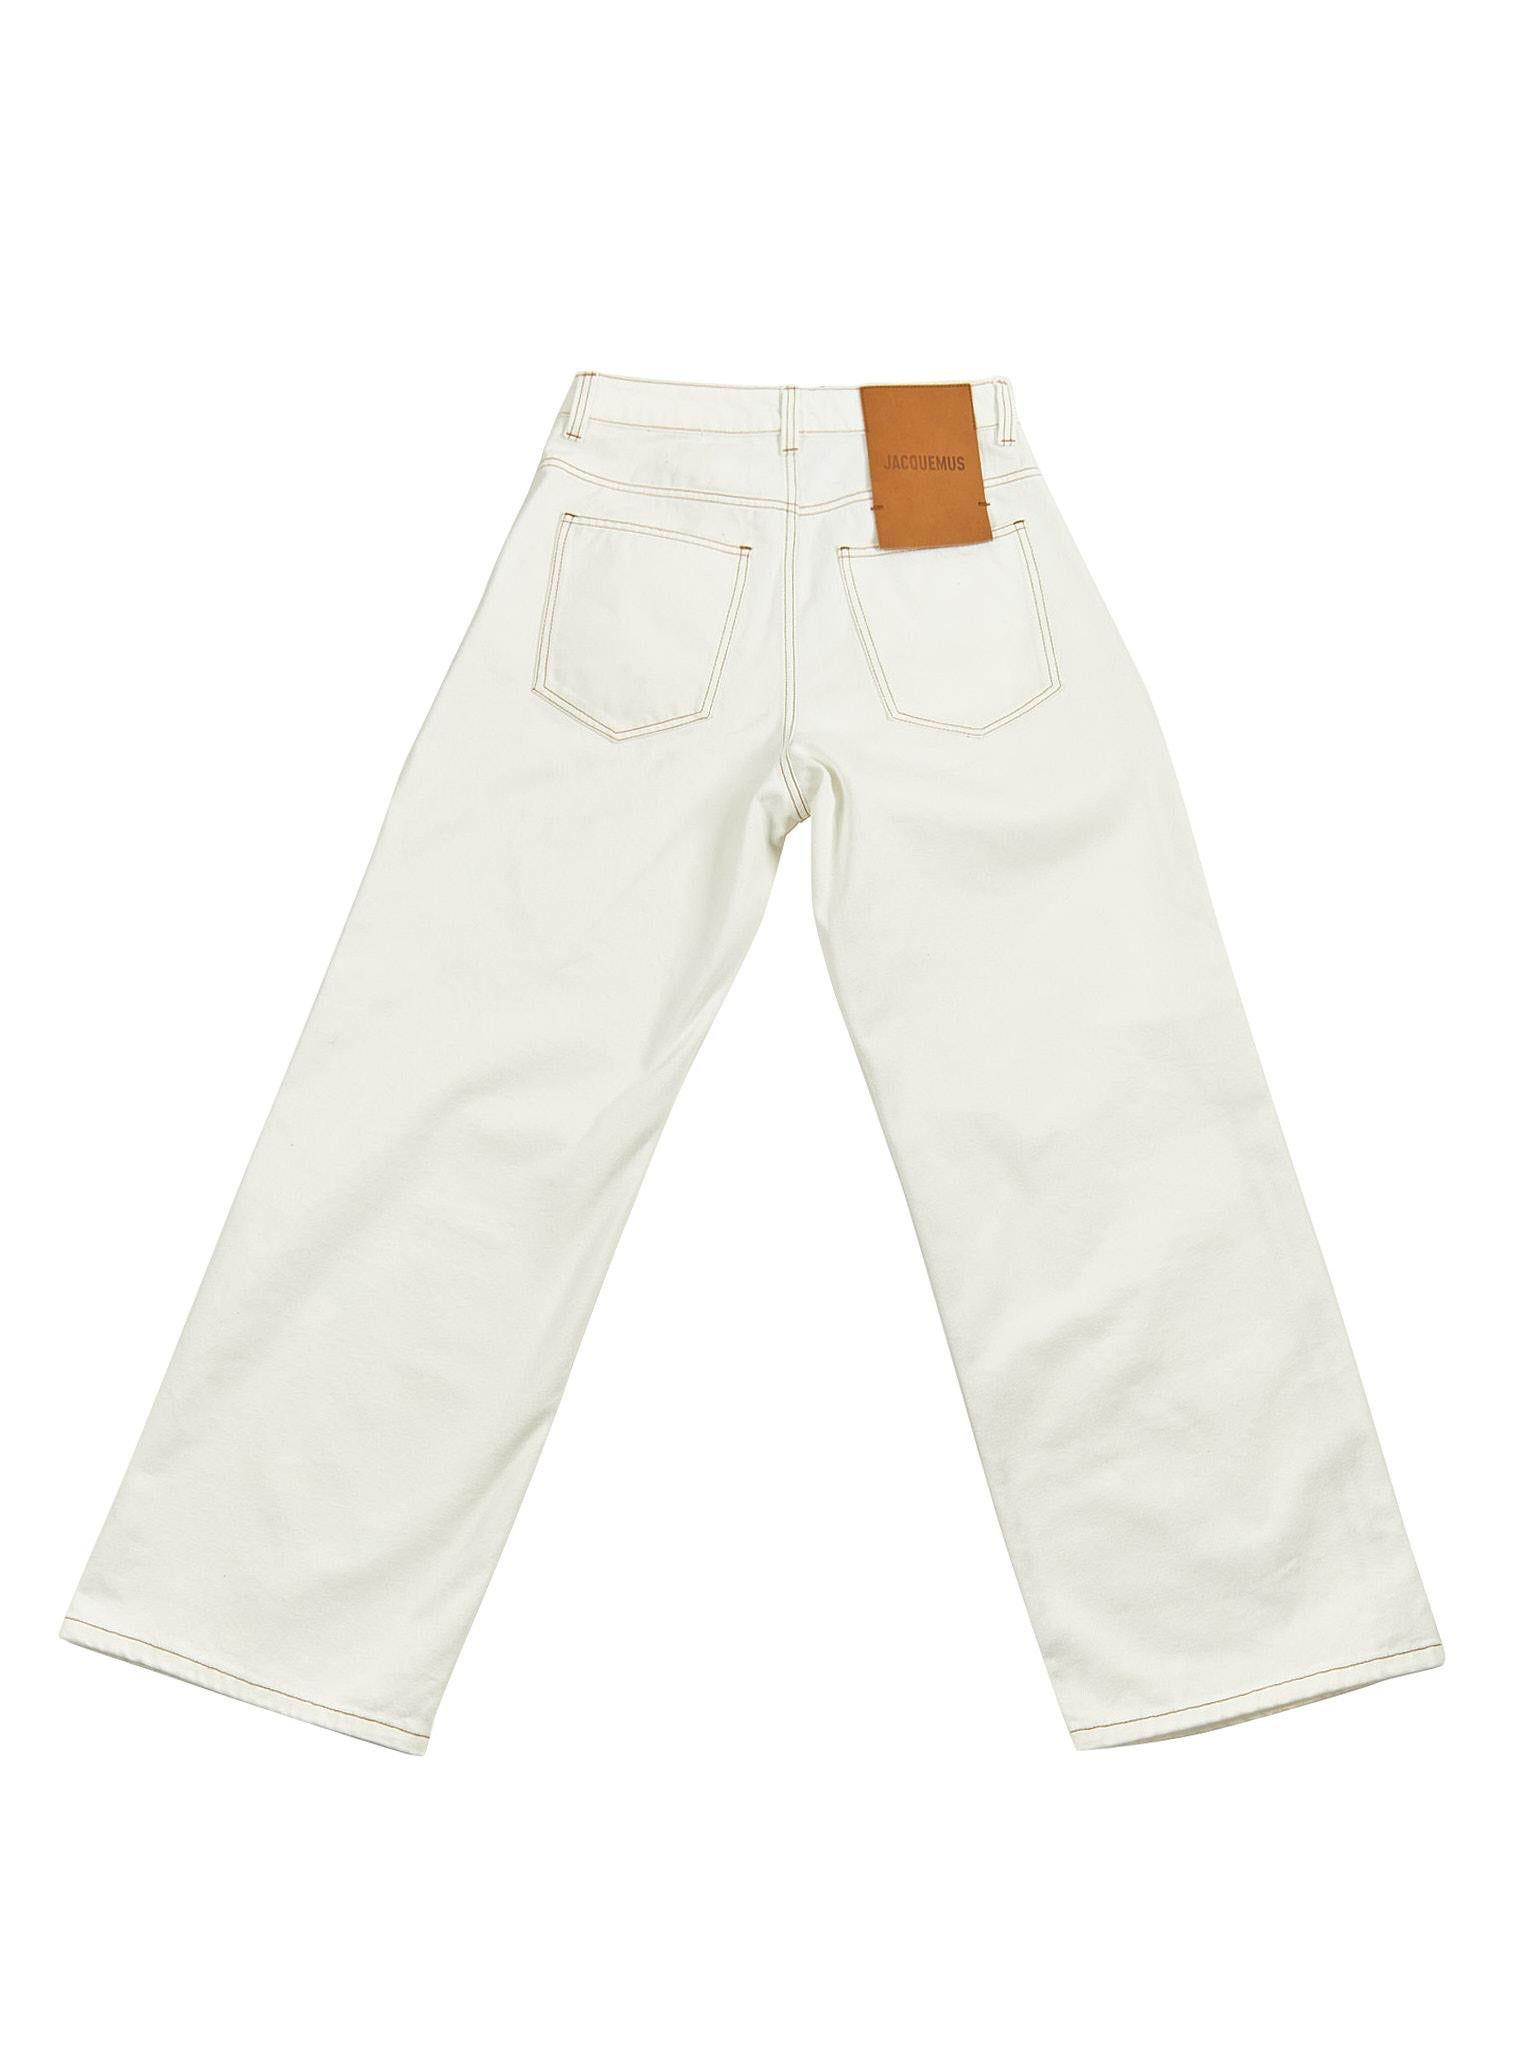 Jacquemus Logo-patch Wide Leg Jeans in Ivory 

Leather logo patch at the back 

Size 28 (US)

52% regenerative cotton, 48% Cotton 

New - Unworn with Tags
